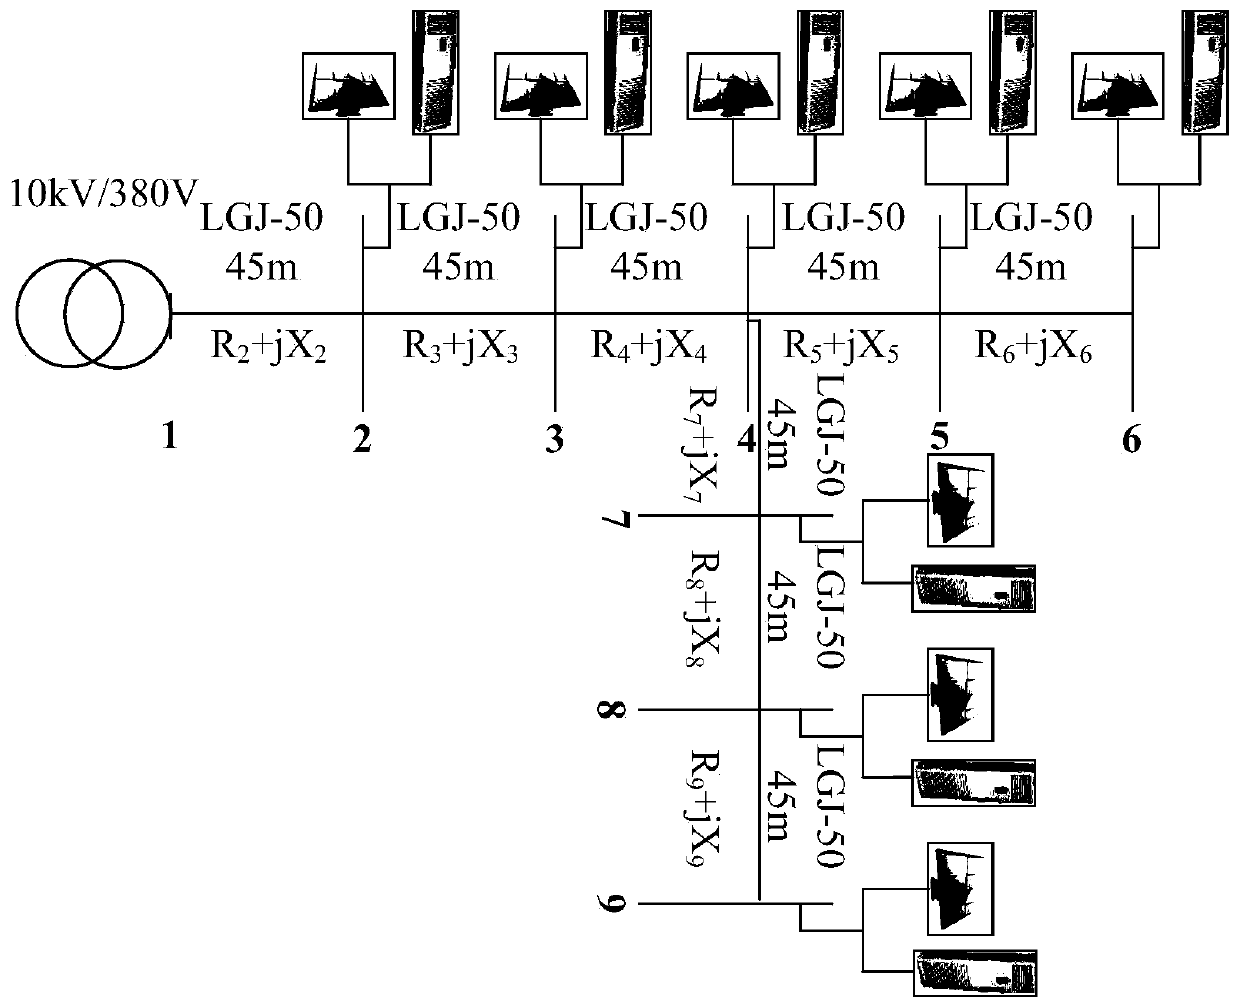 Distributed control method for household photovoltaic grid-connected inverter based on voltage sensitivity matrix